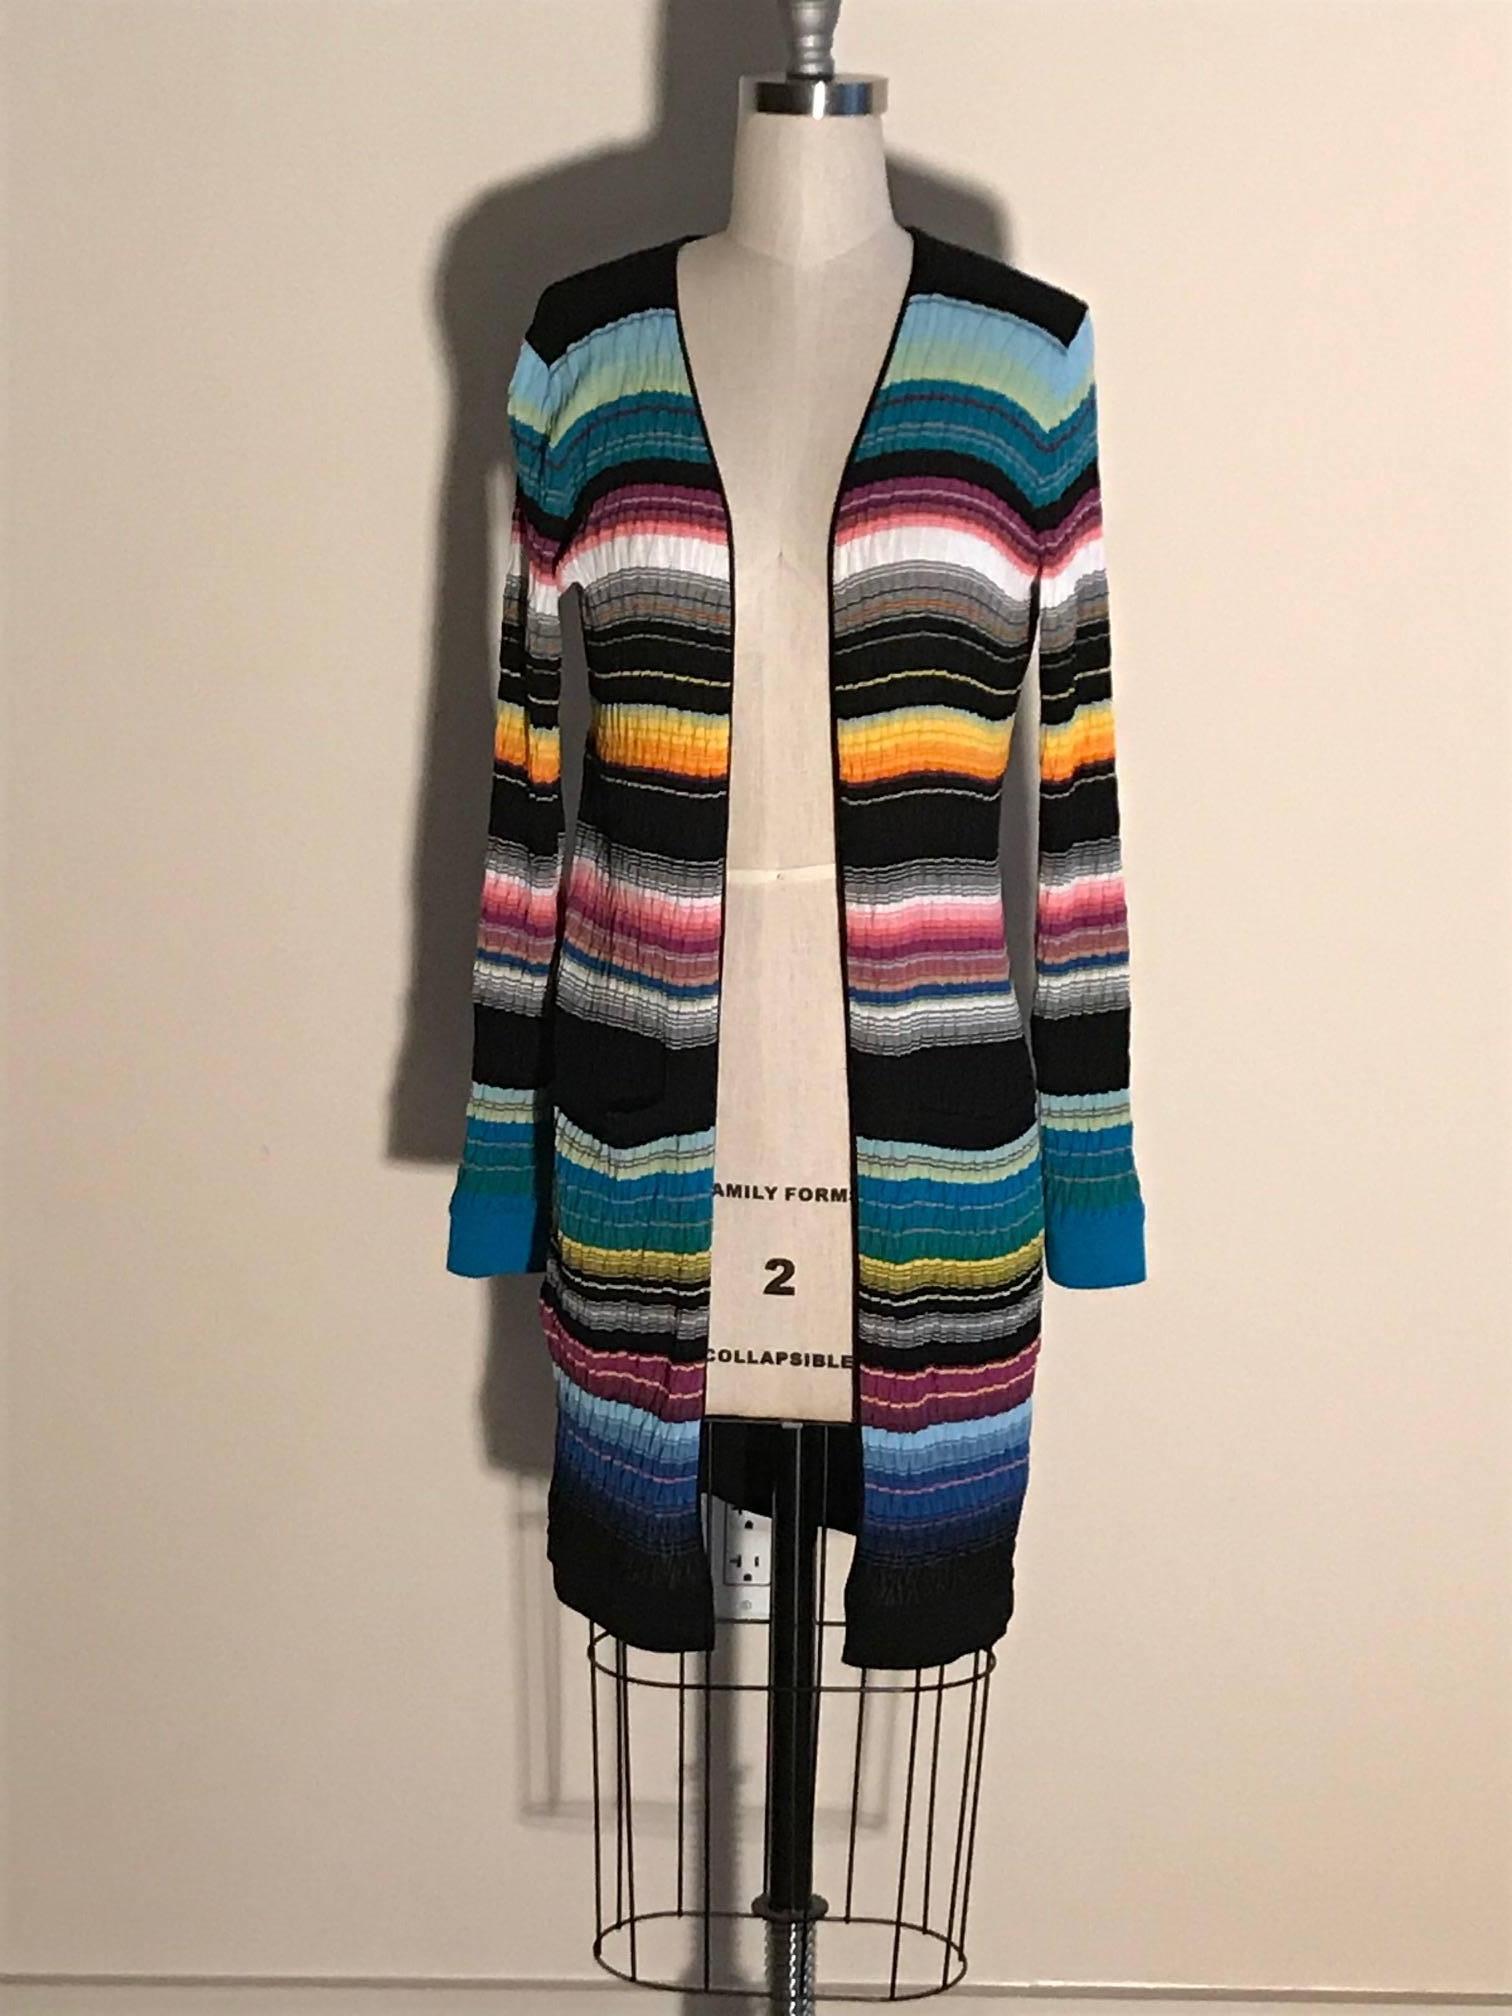 Missoni stripe knit long sleeve sweater with varying shades of teal, fuchsia, goldenrod, black, and cream.  Textured with a chevron pattern ribbing. Pockets at both sides of front hip. Open front, no fasteners. 

67% cotton, 31% rayon, 2%